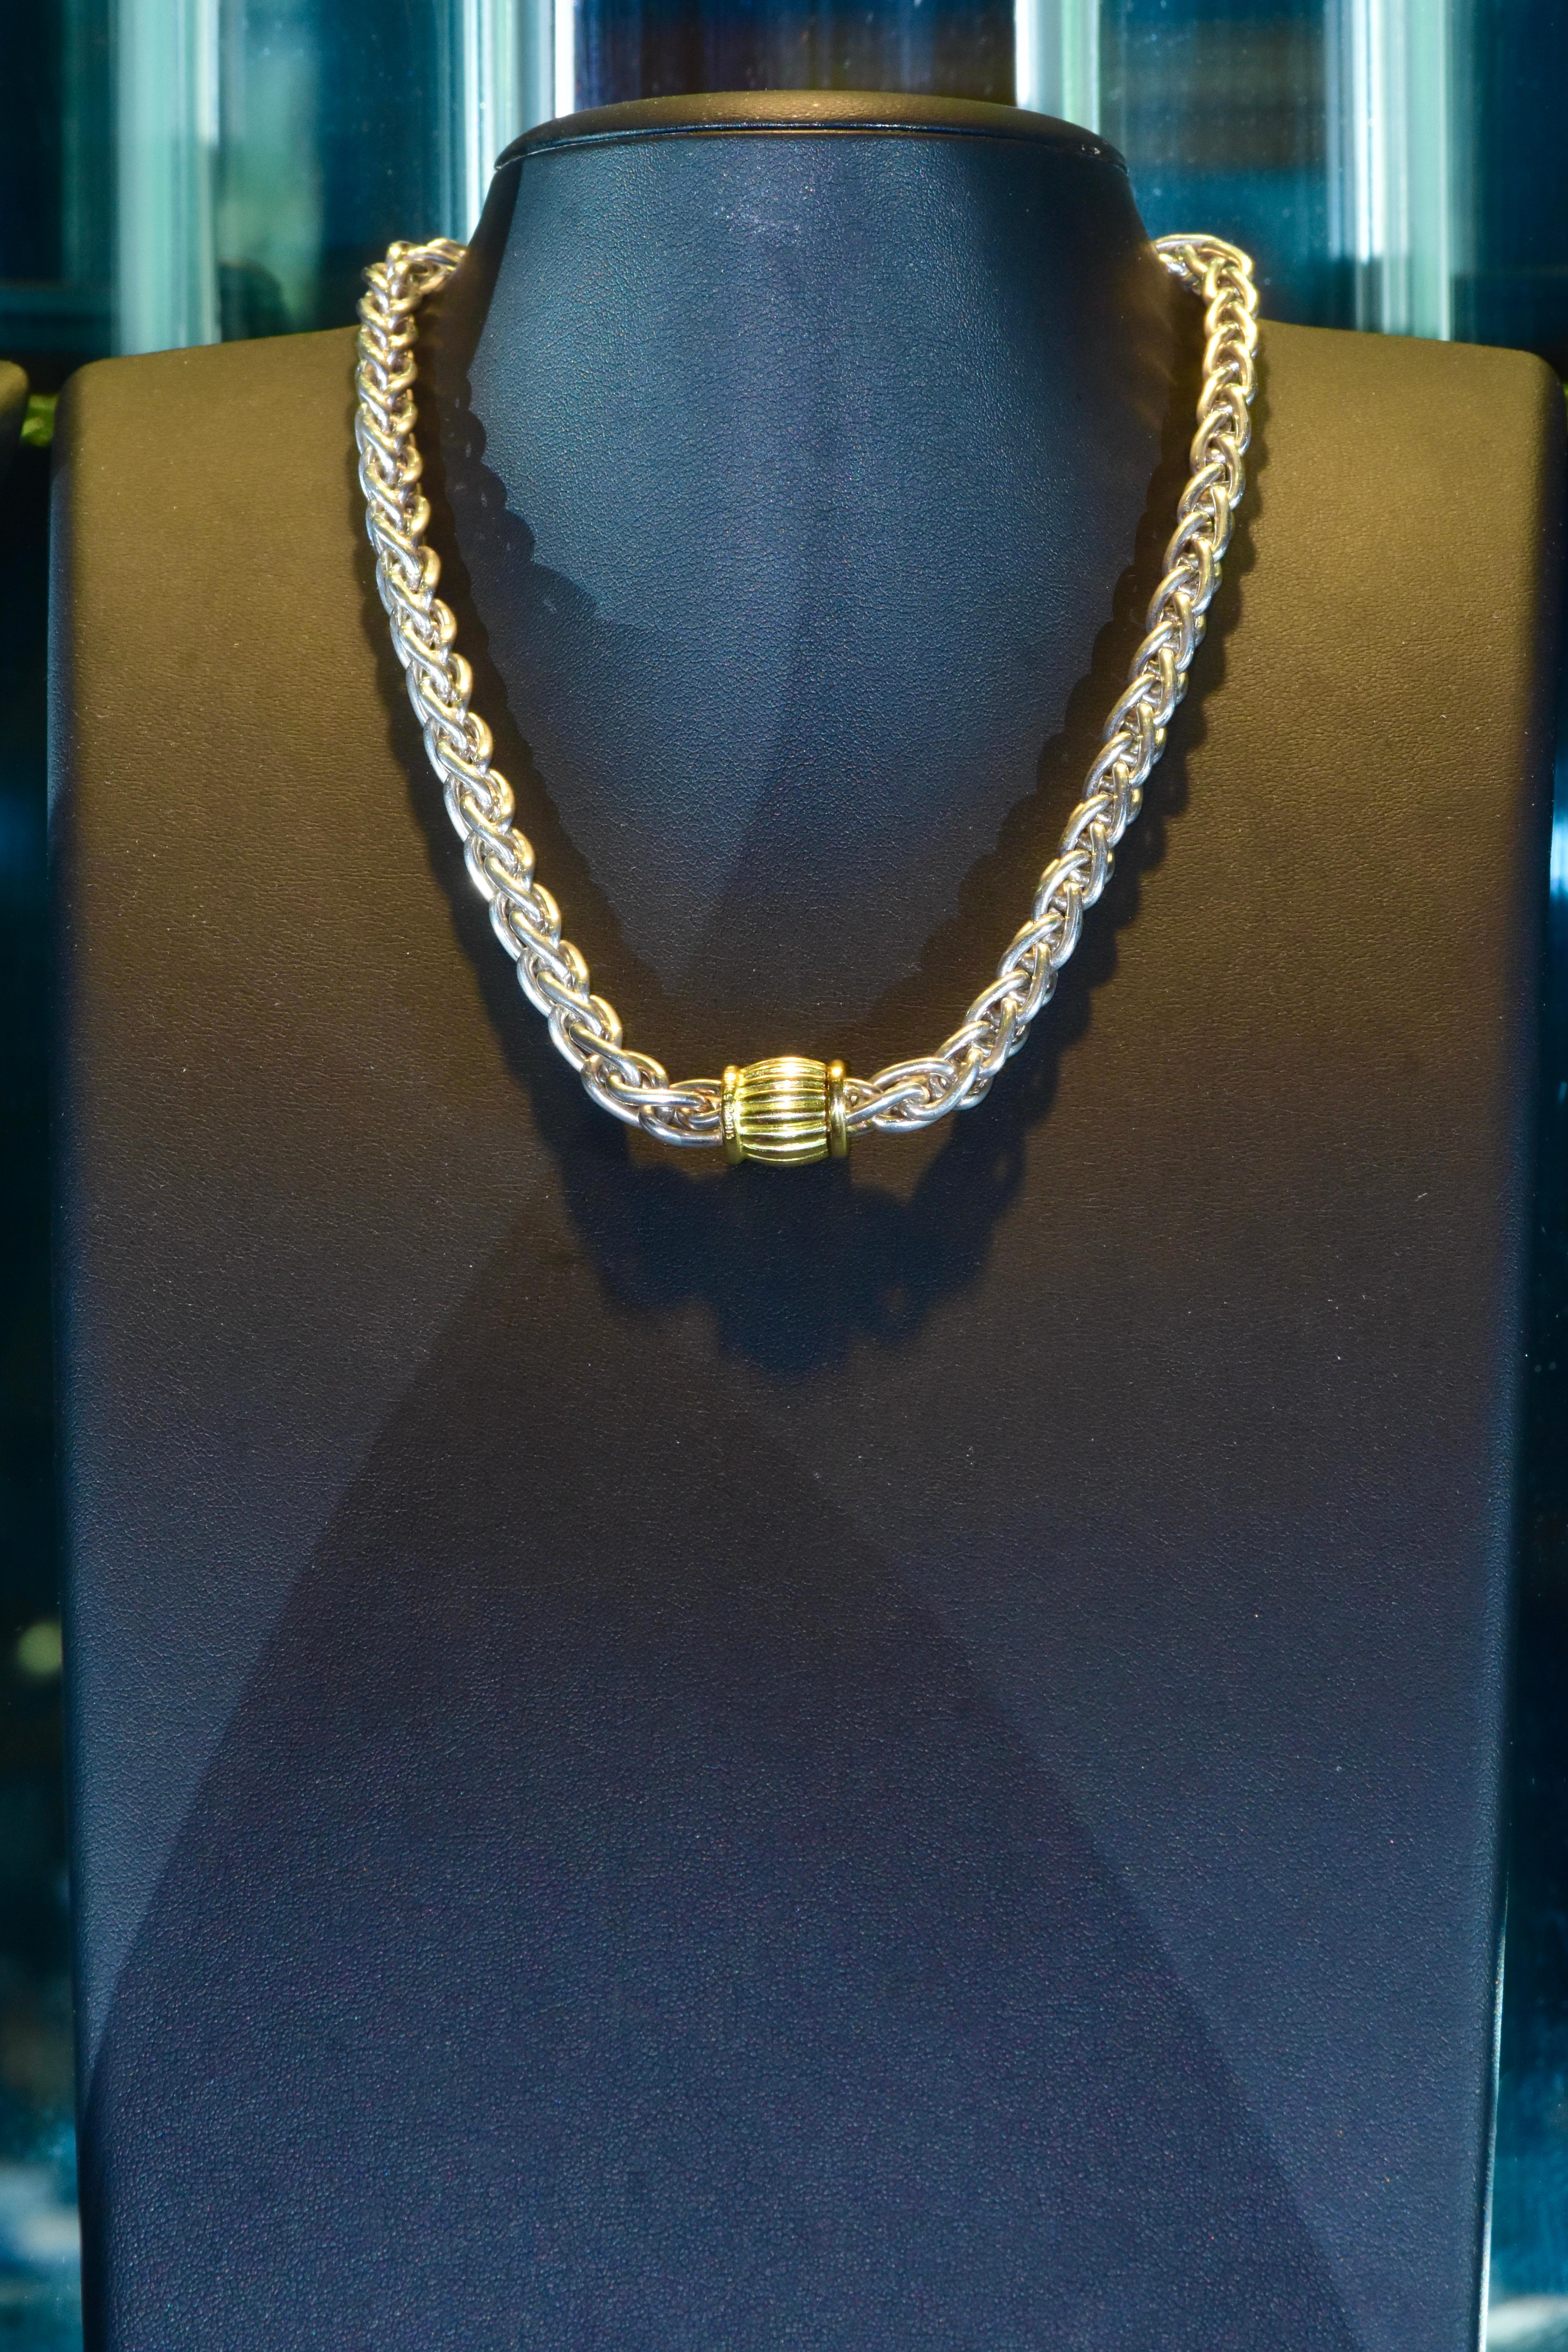 Hermes Paris 18k Yellow Gold and Sterling Silver Necklace, circa 1995 For Sale 1